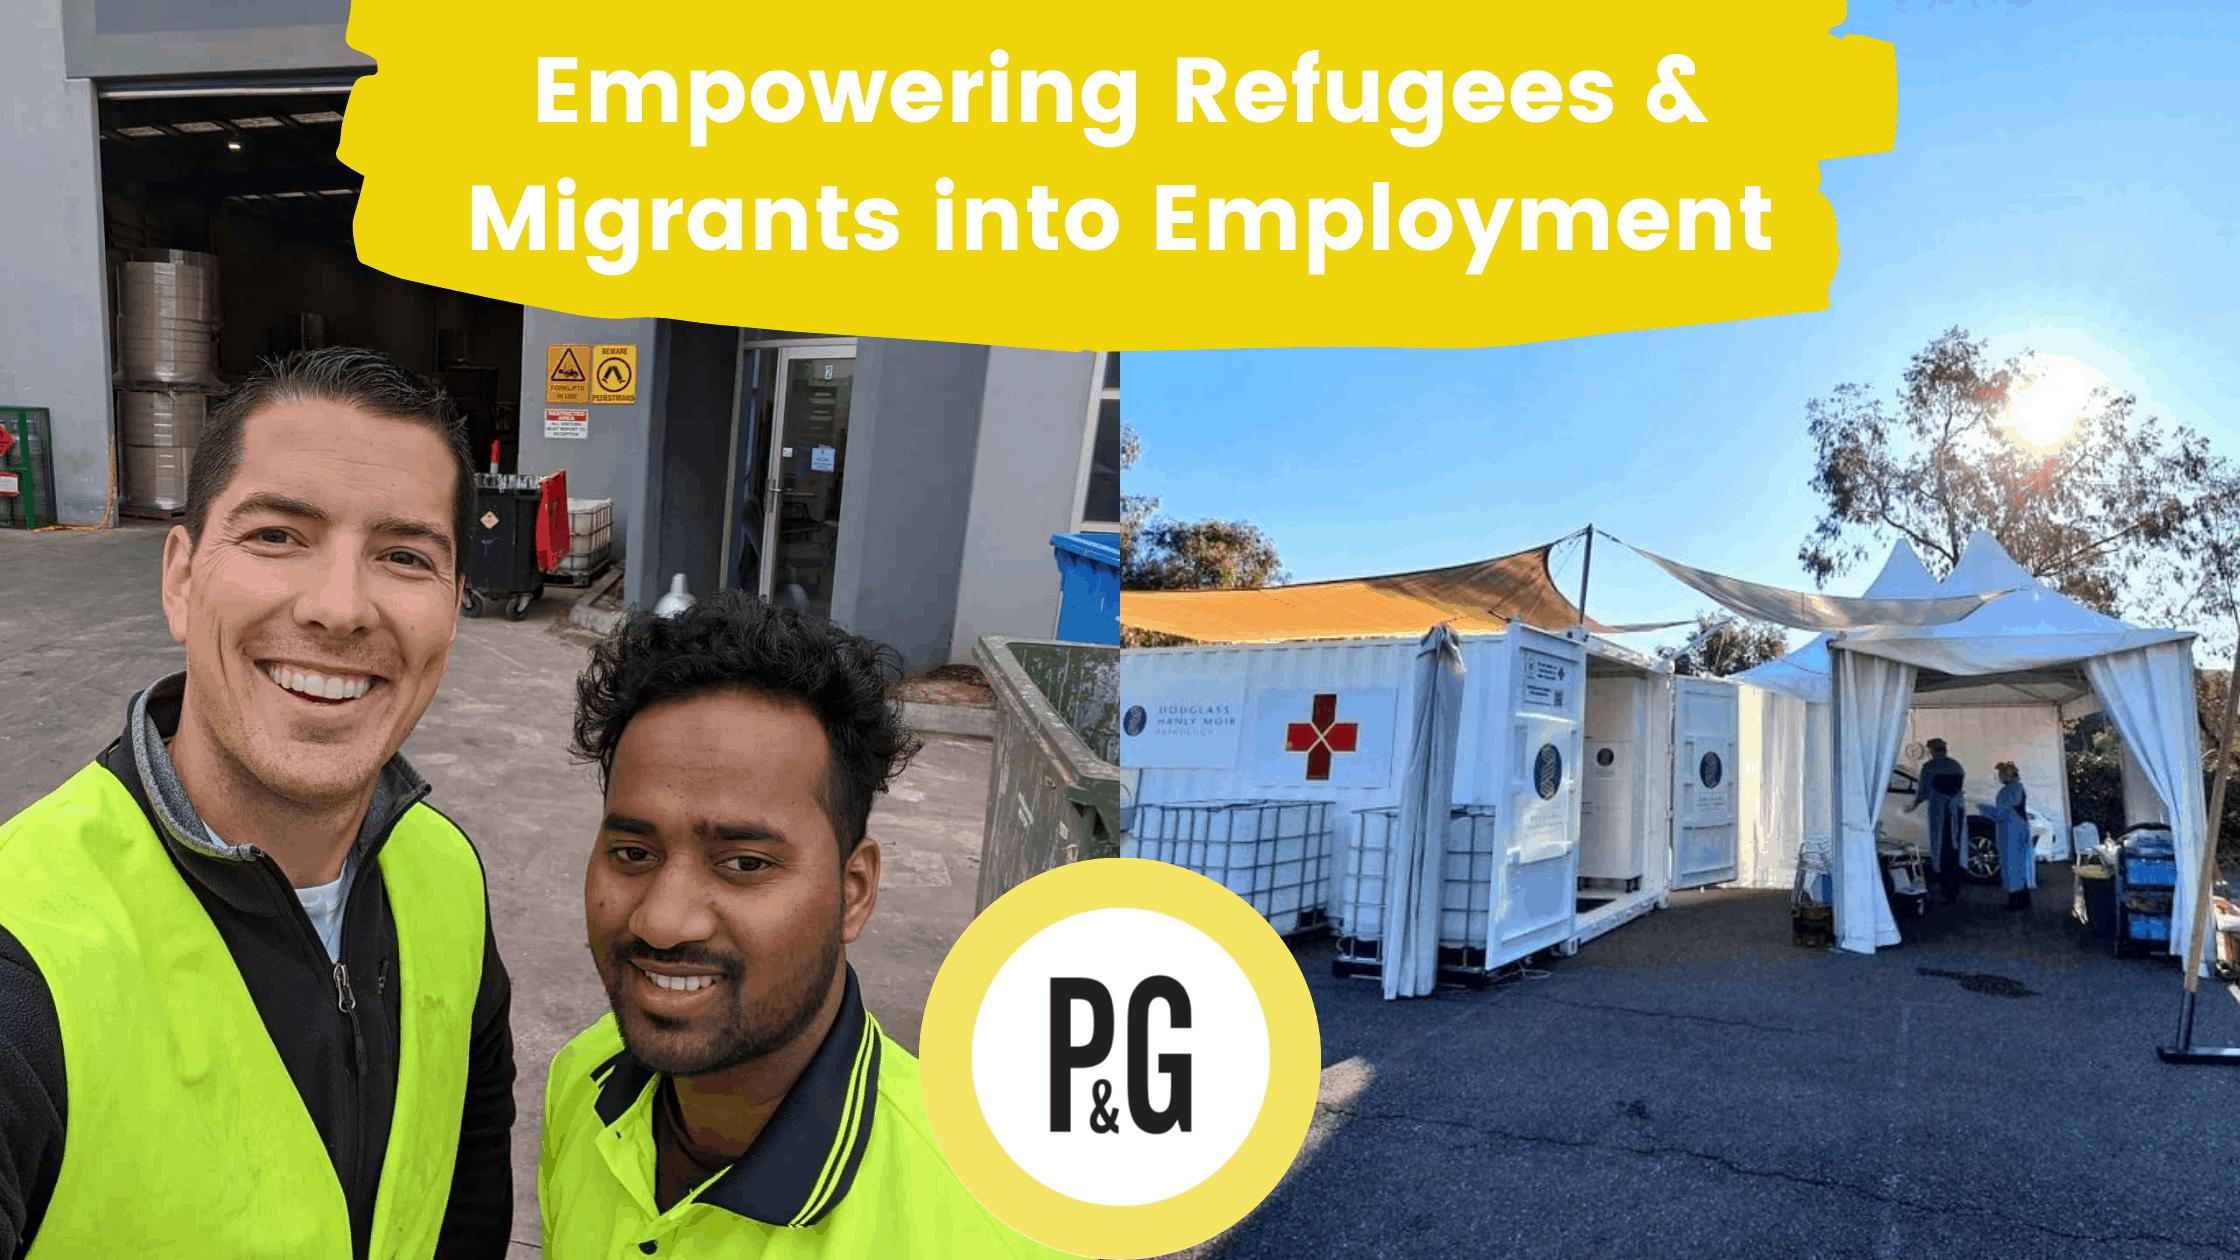 P&G Purpose: Empowering Refugees & Migrants into Employment